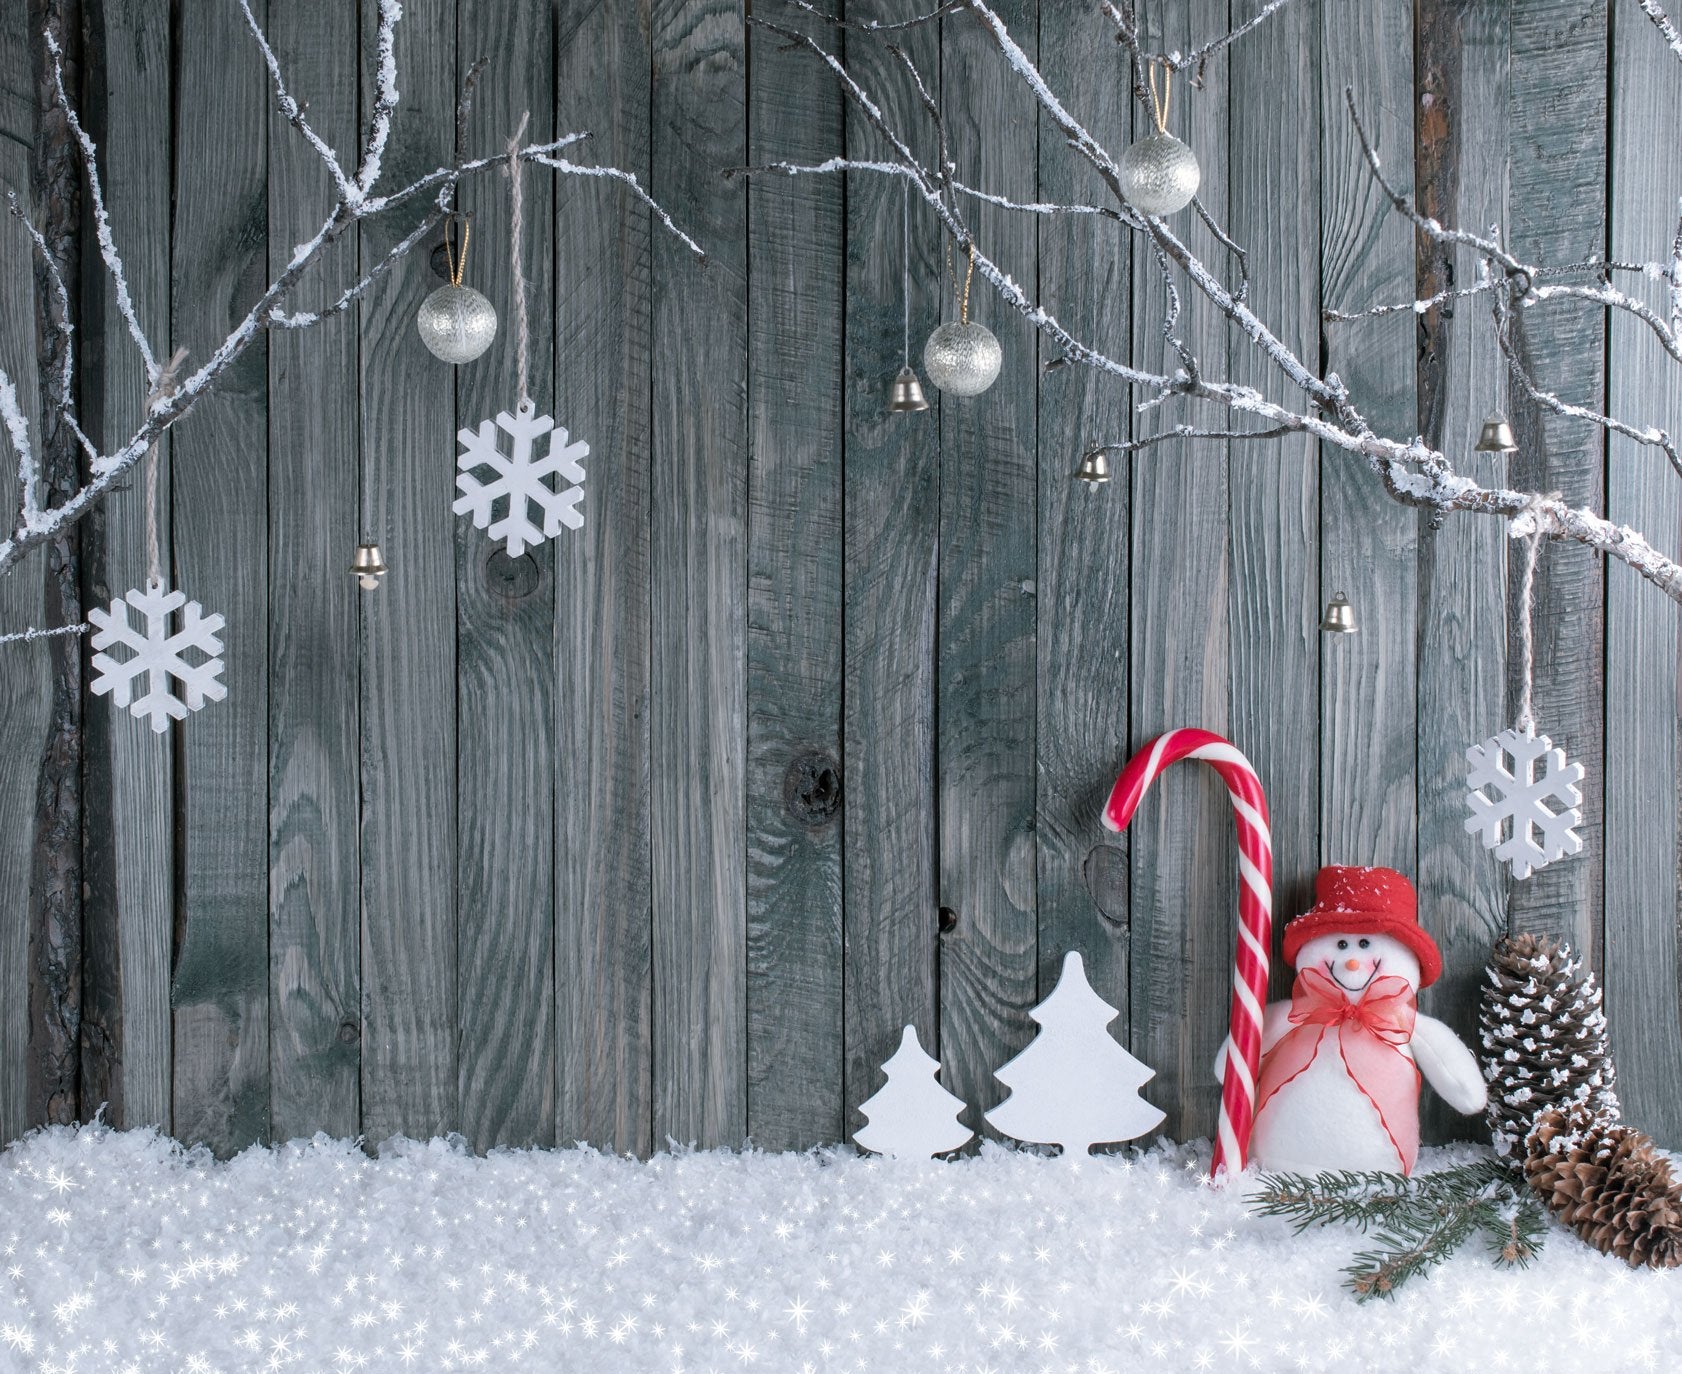 Kate Gray wood Tree branches snow winter backdrop for Christmas Photography - Kate backdrop UK